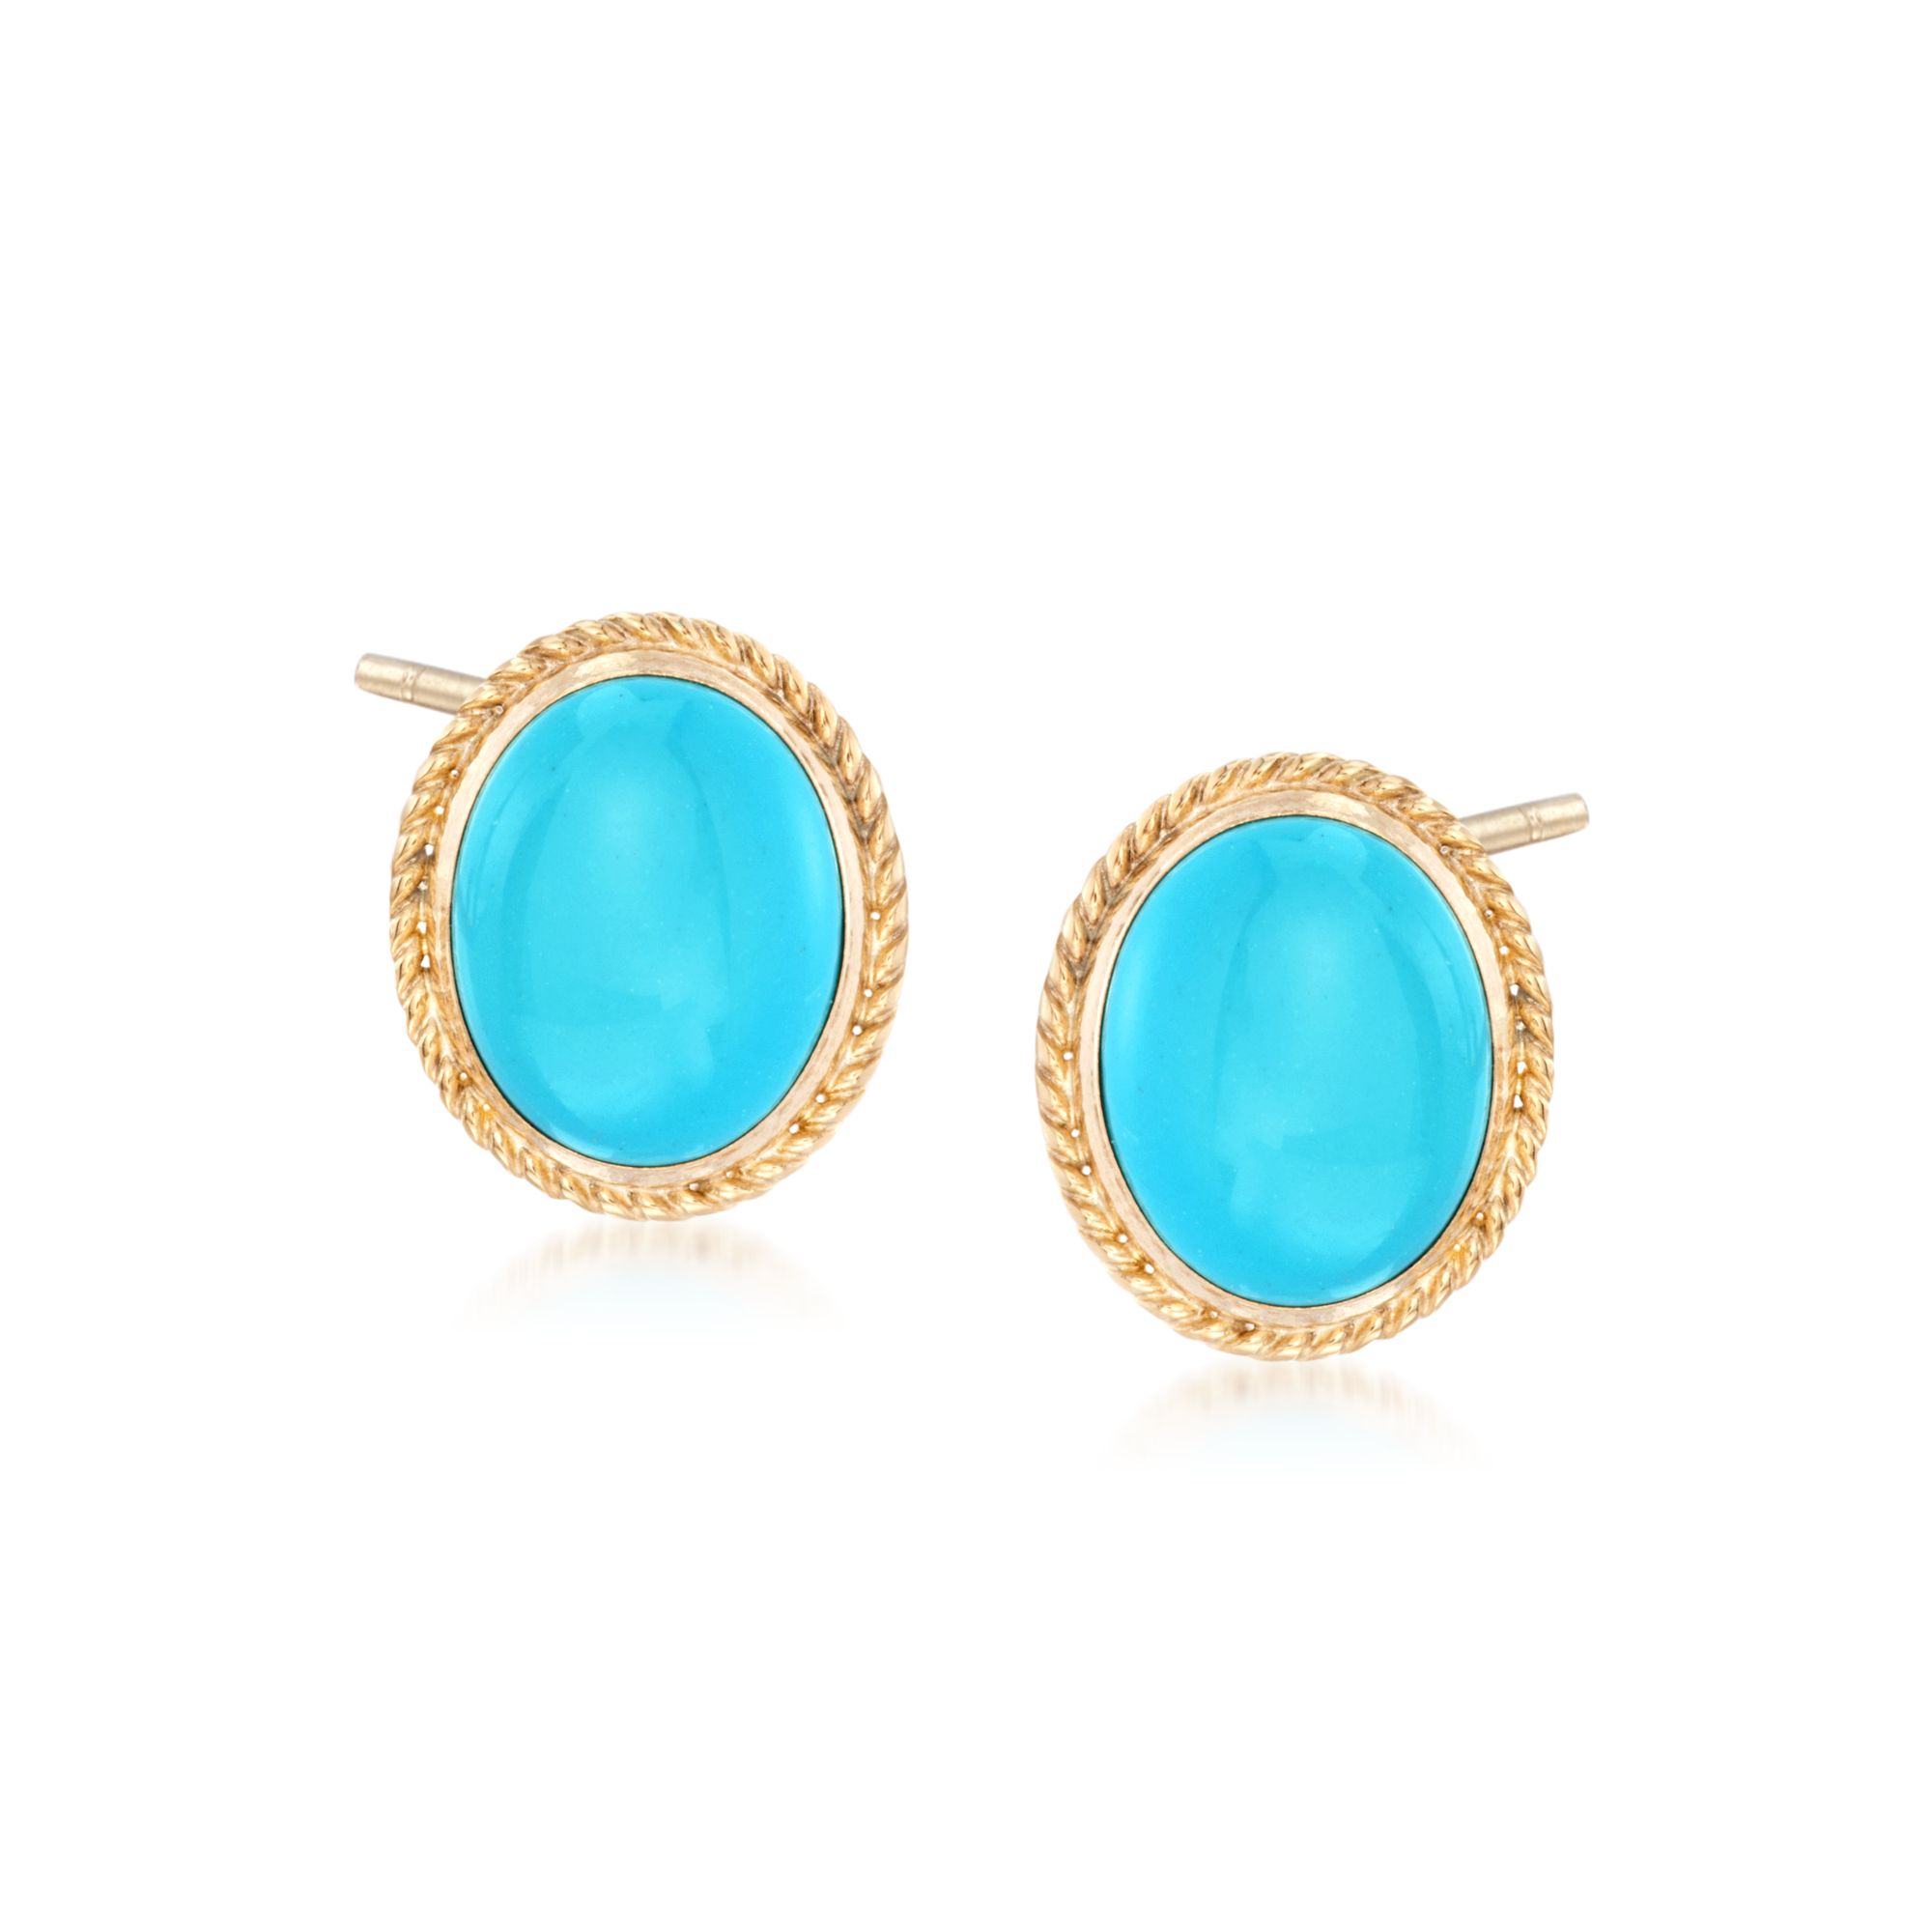 Oval Turquoise Earrings in 14kt Yellow Gold | Ross-Simons